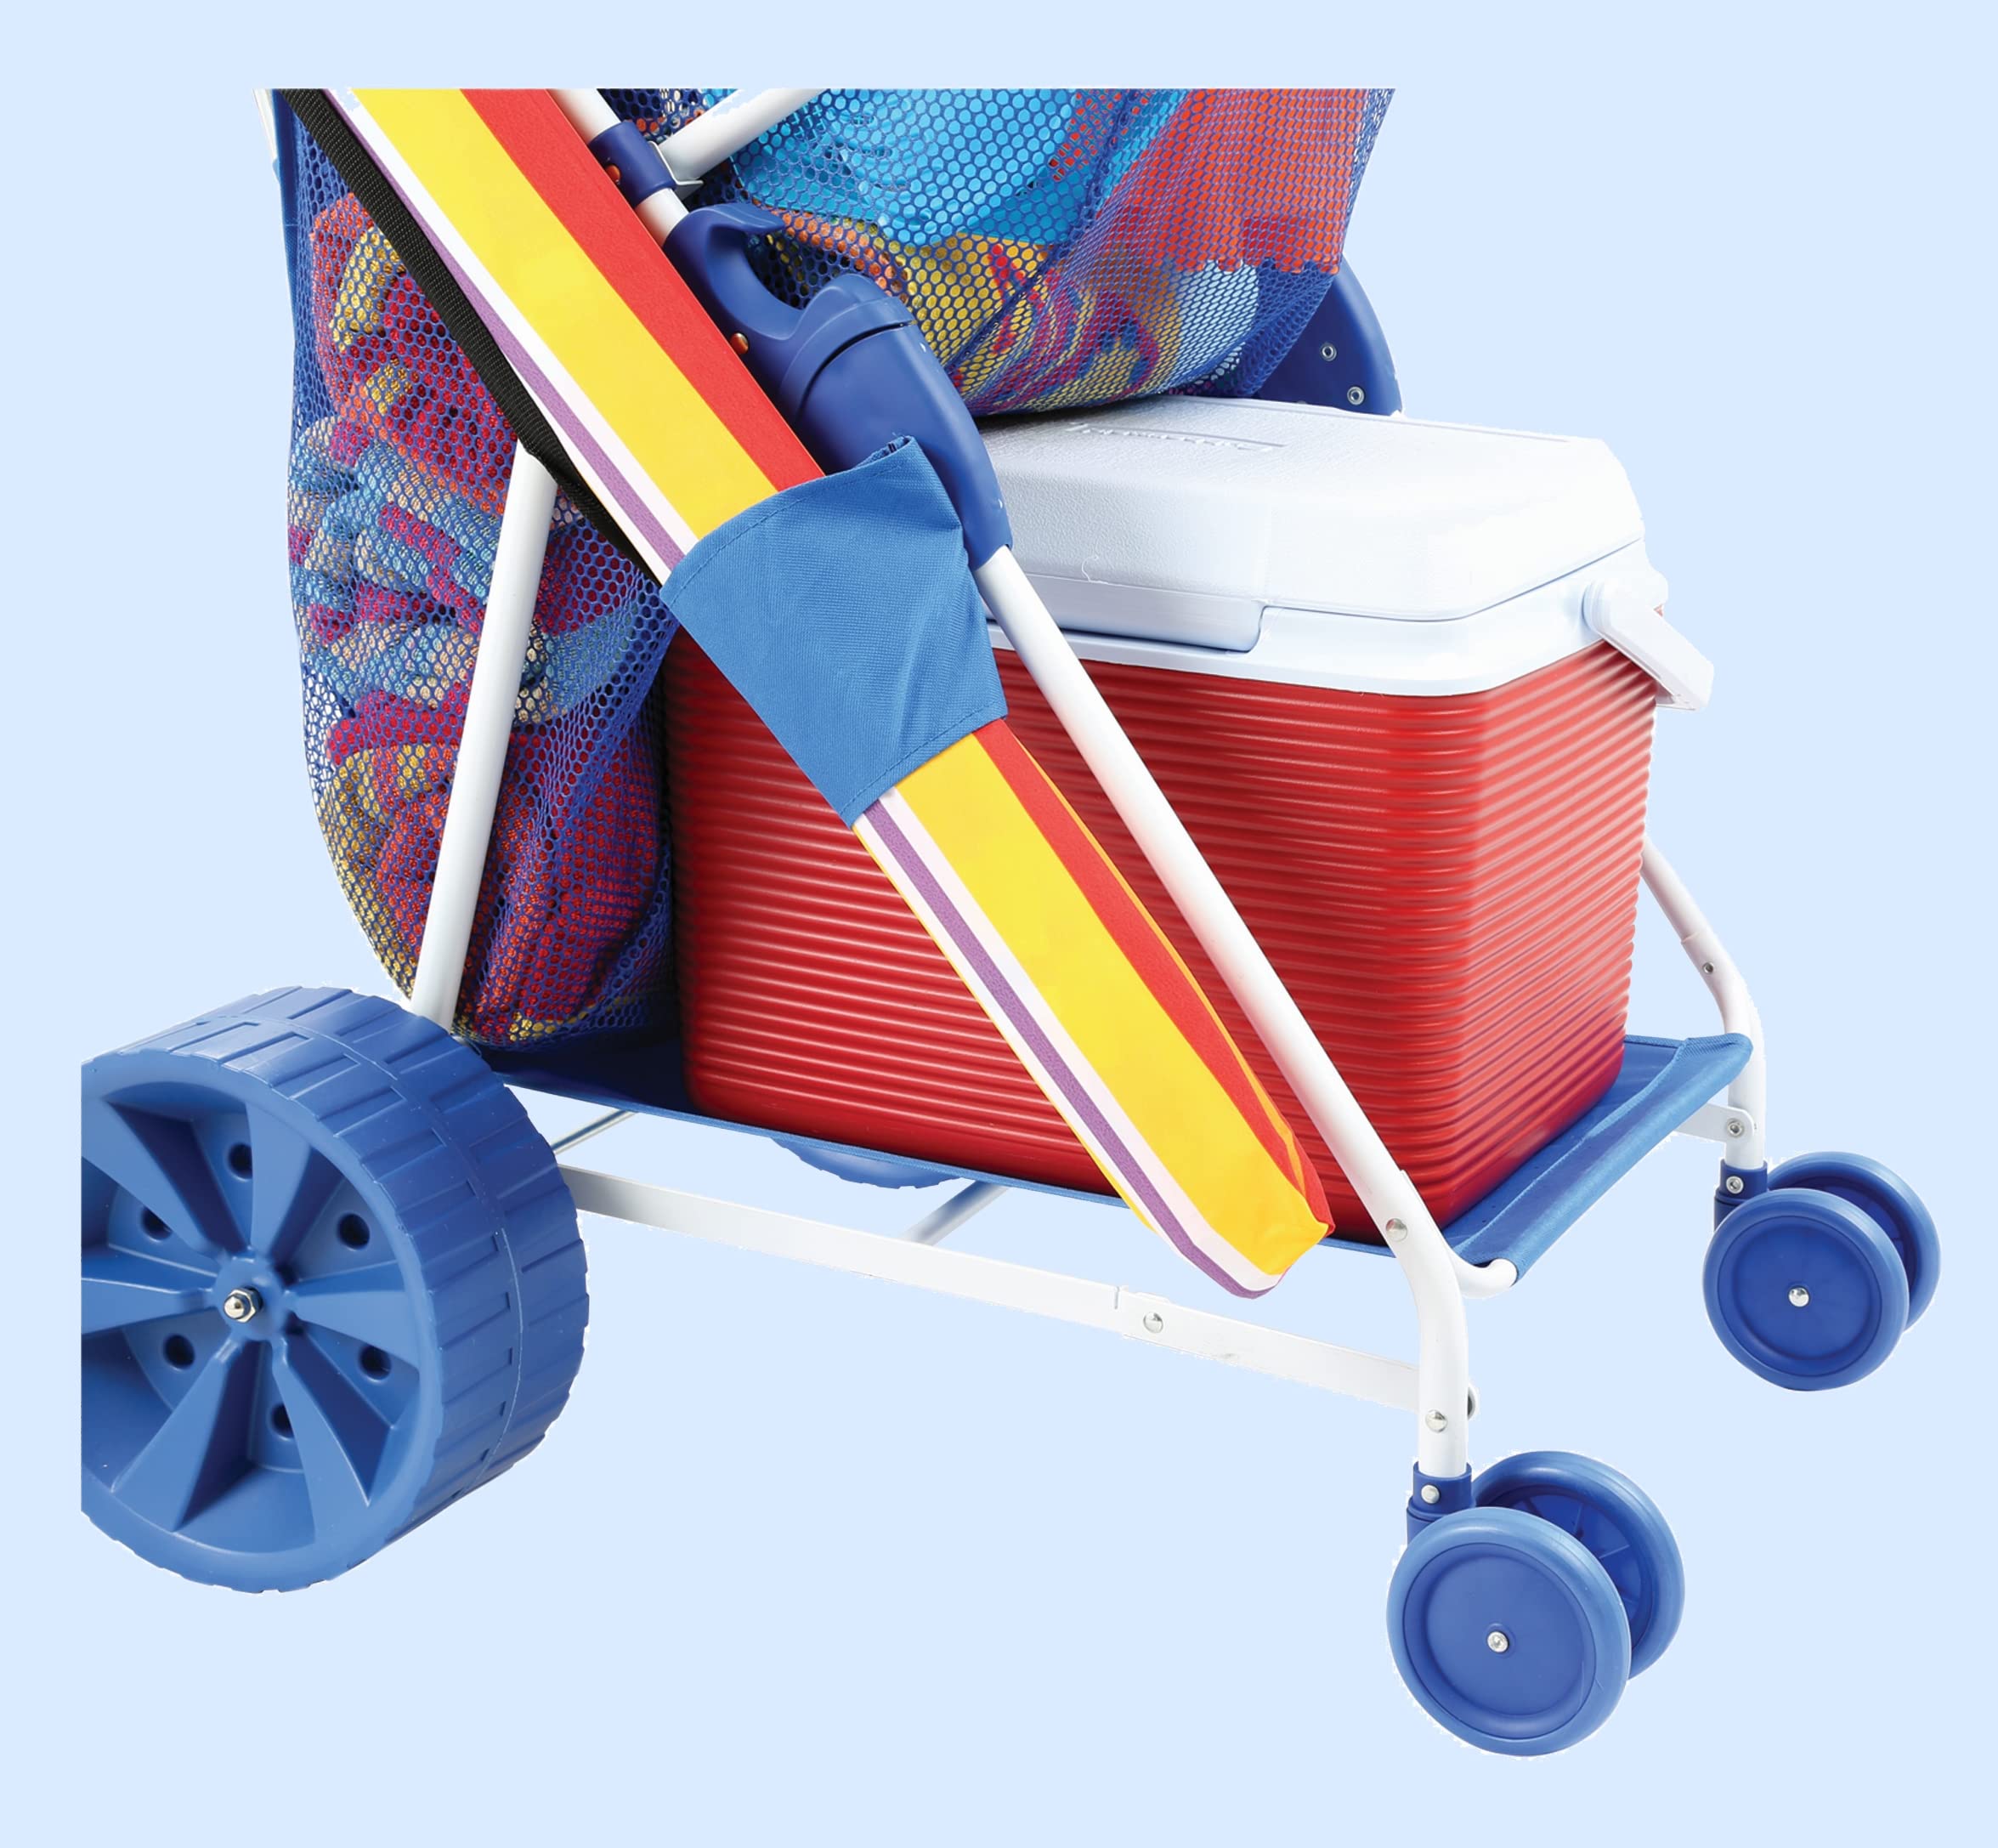 Bundaloo Beach Cart with Big Wheels for Sand - Foldable Wagon with Large Capacity and Easy Transports Beach Gear  - Very Good